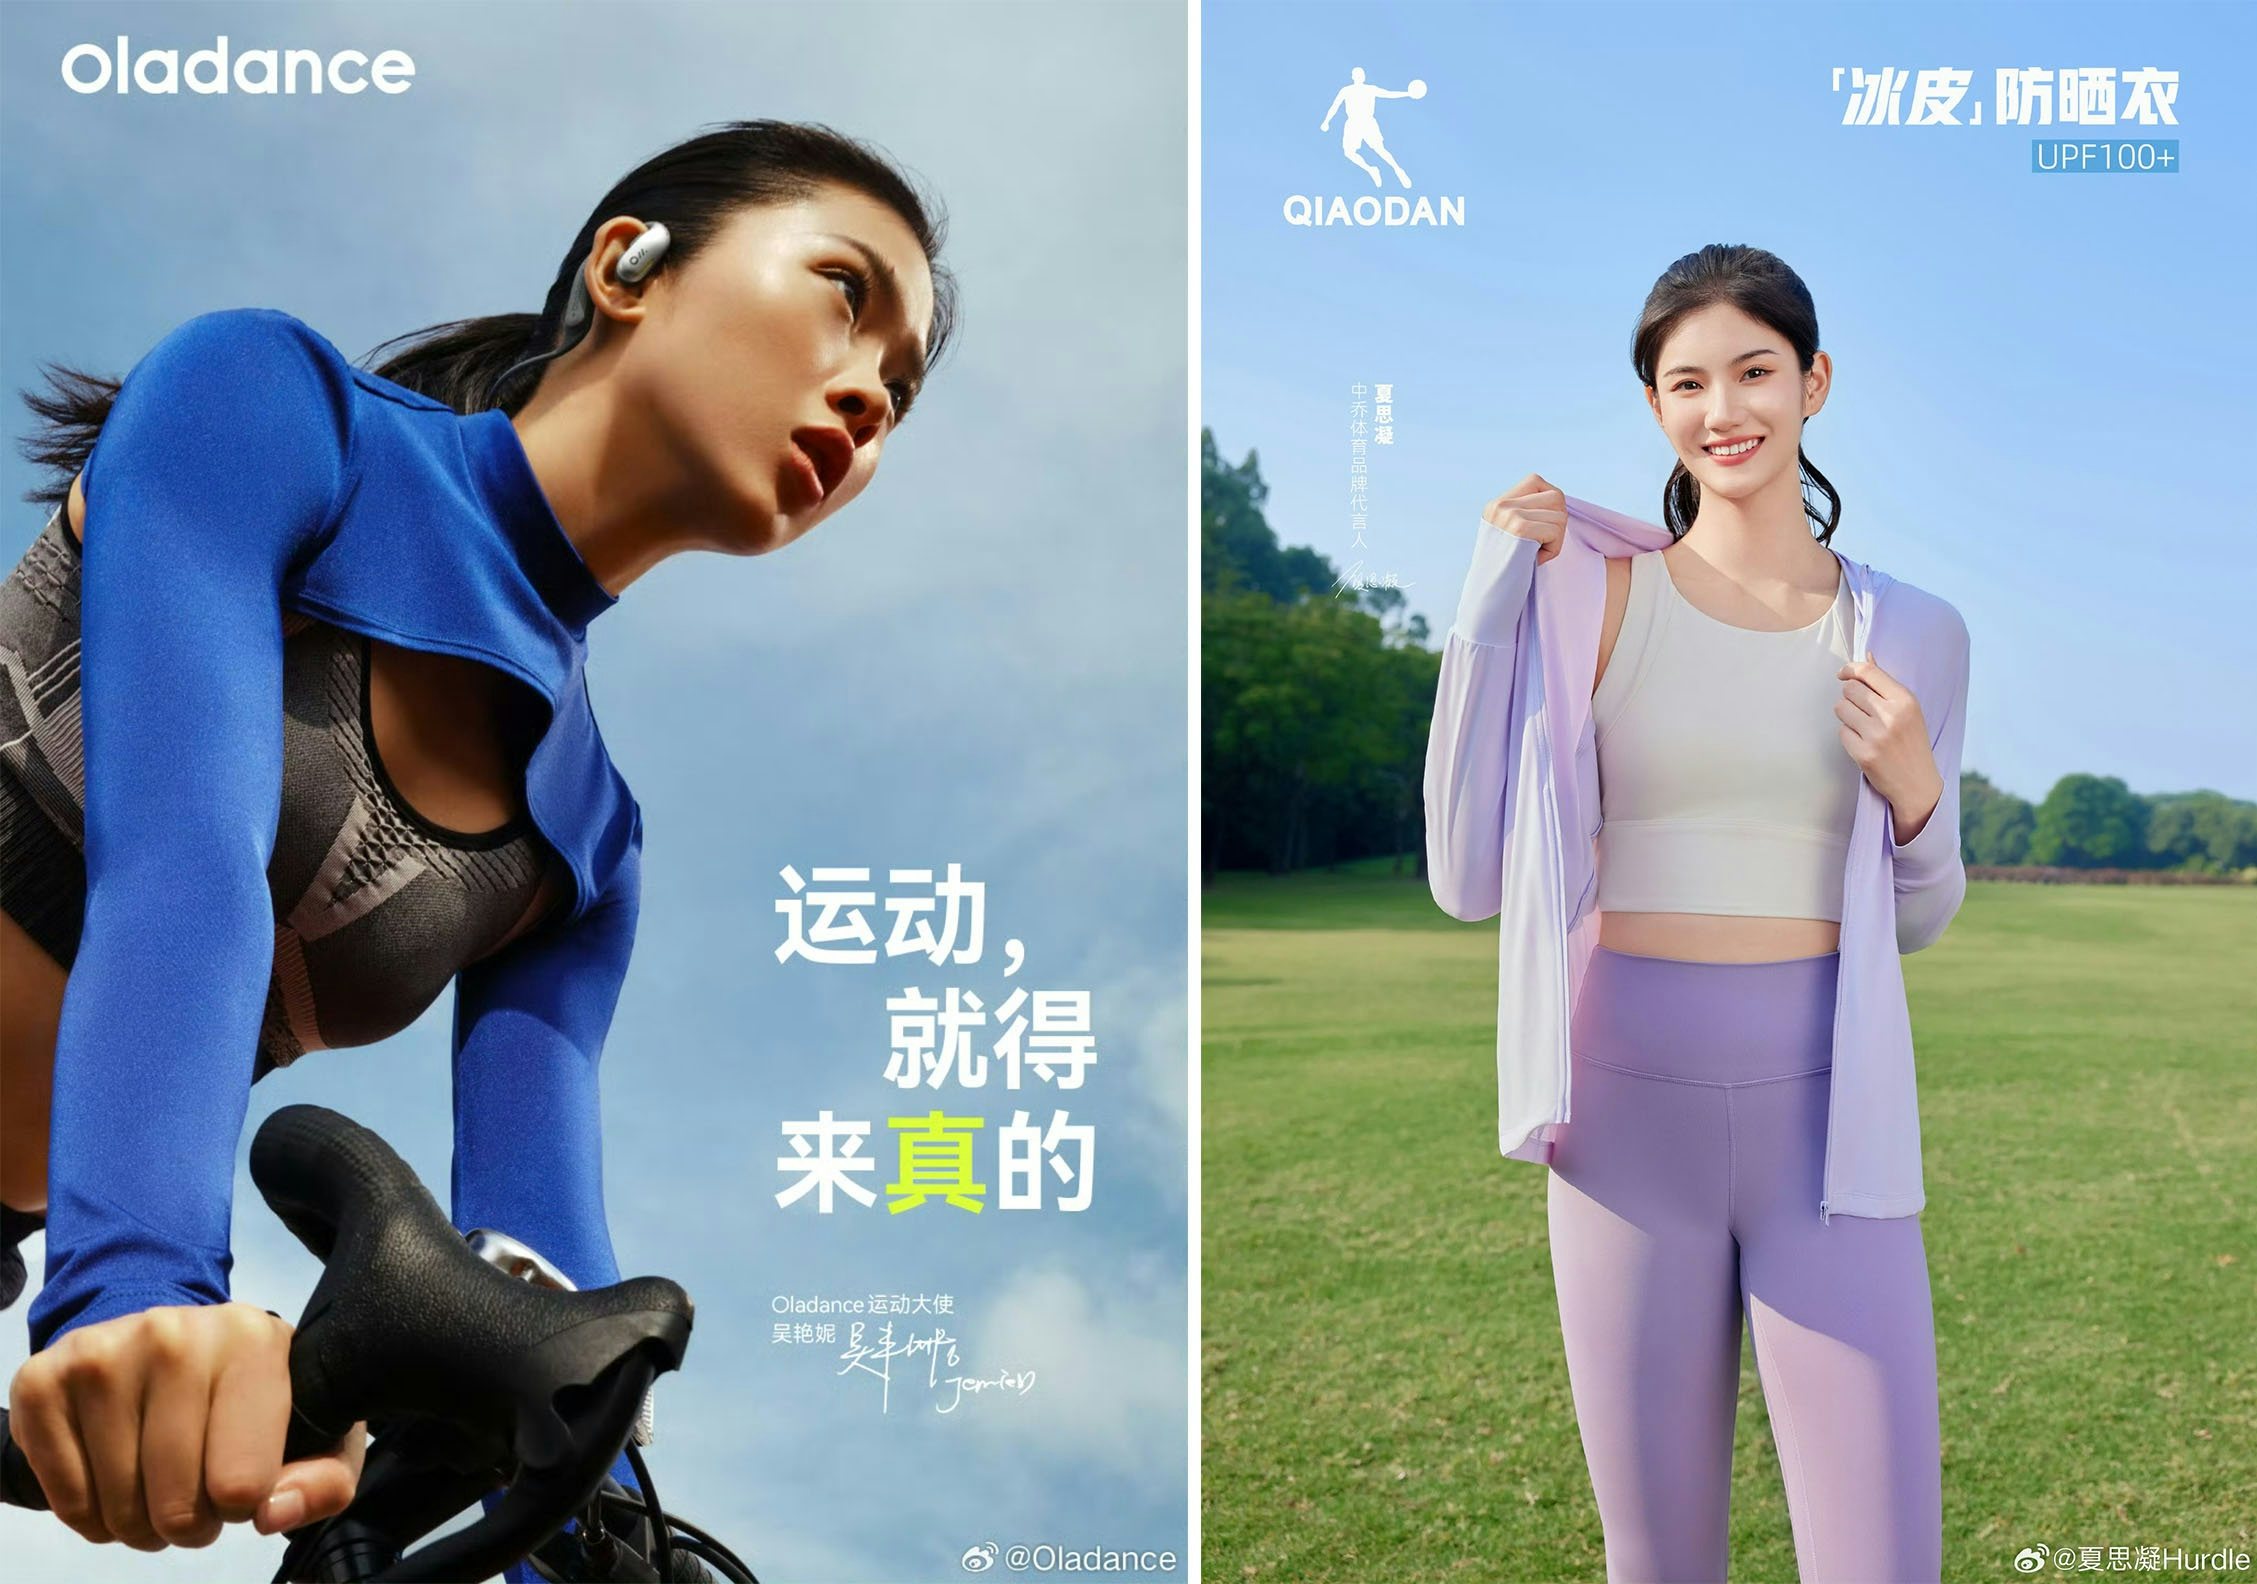 Chinese athletes Wu Yanni, left, and Xia Sining, right, promote local brands Oladance and Qiaodan, respectively. Photo: Weibo